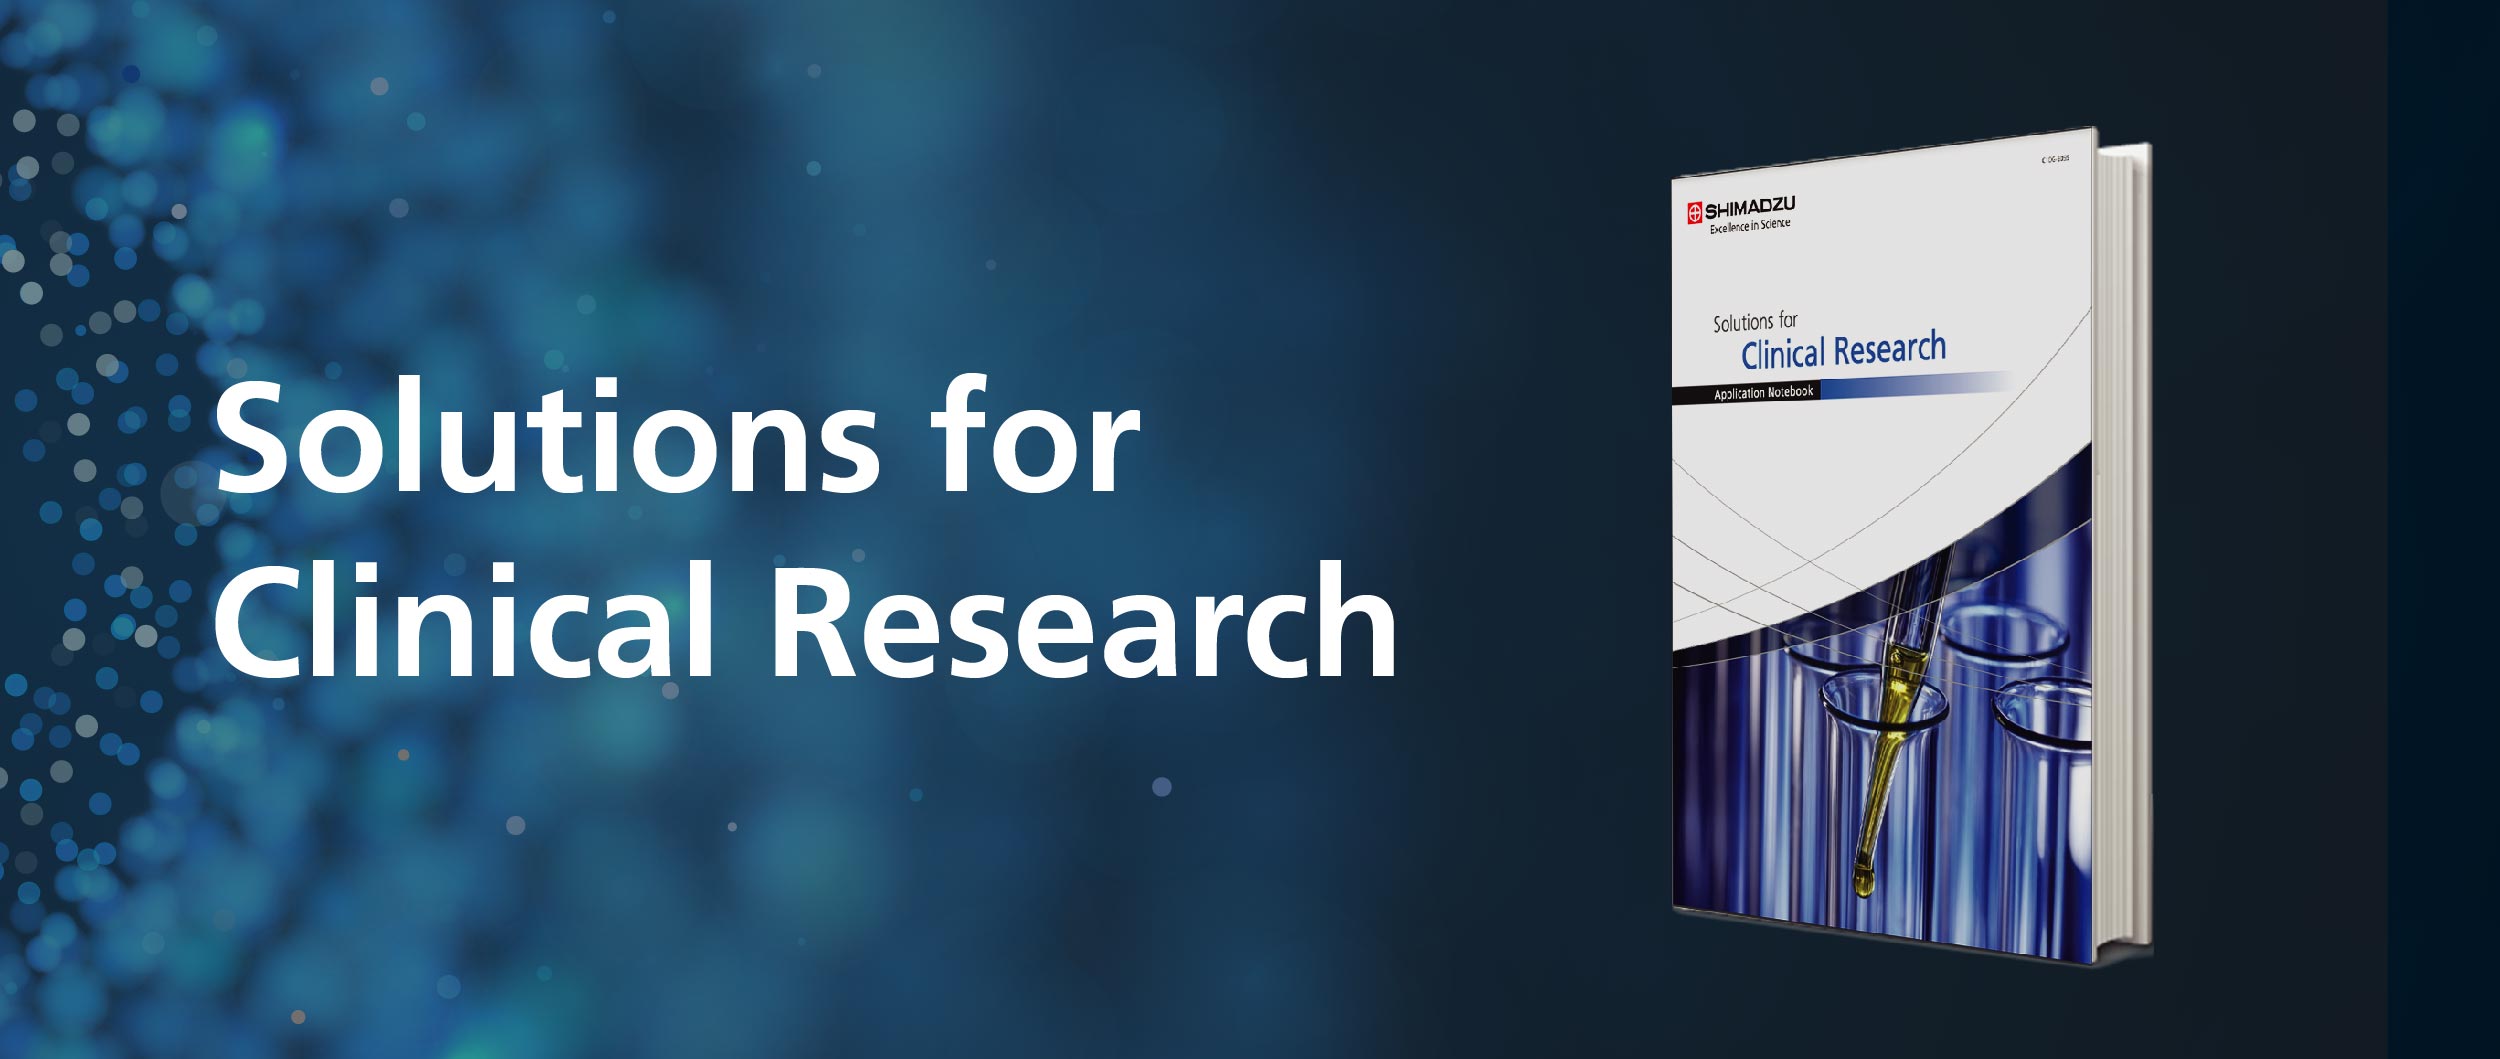 Solutions for Clinical Research